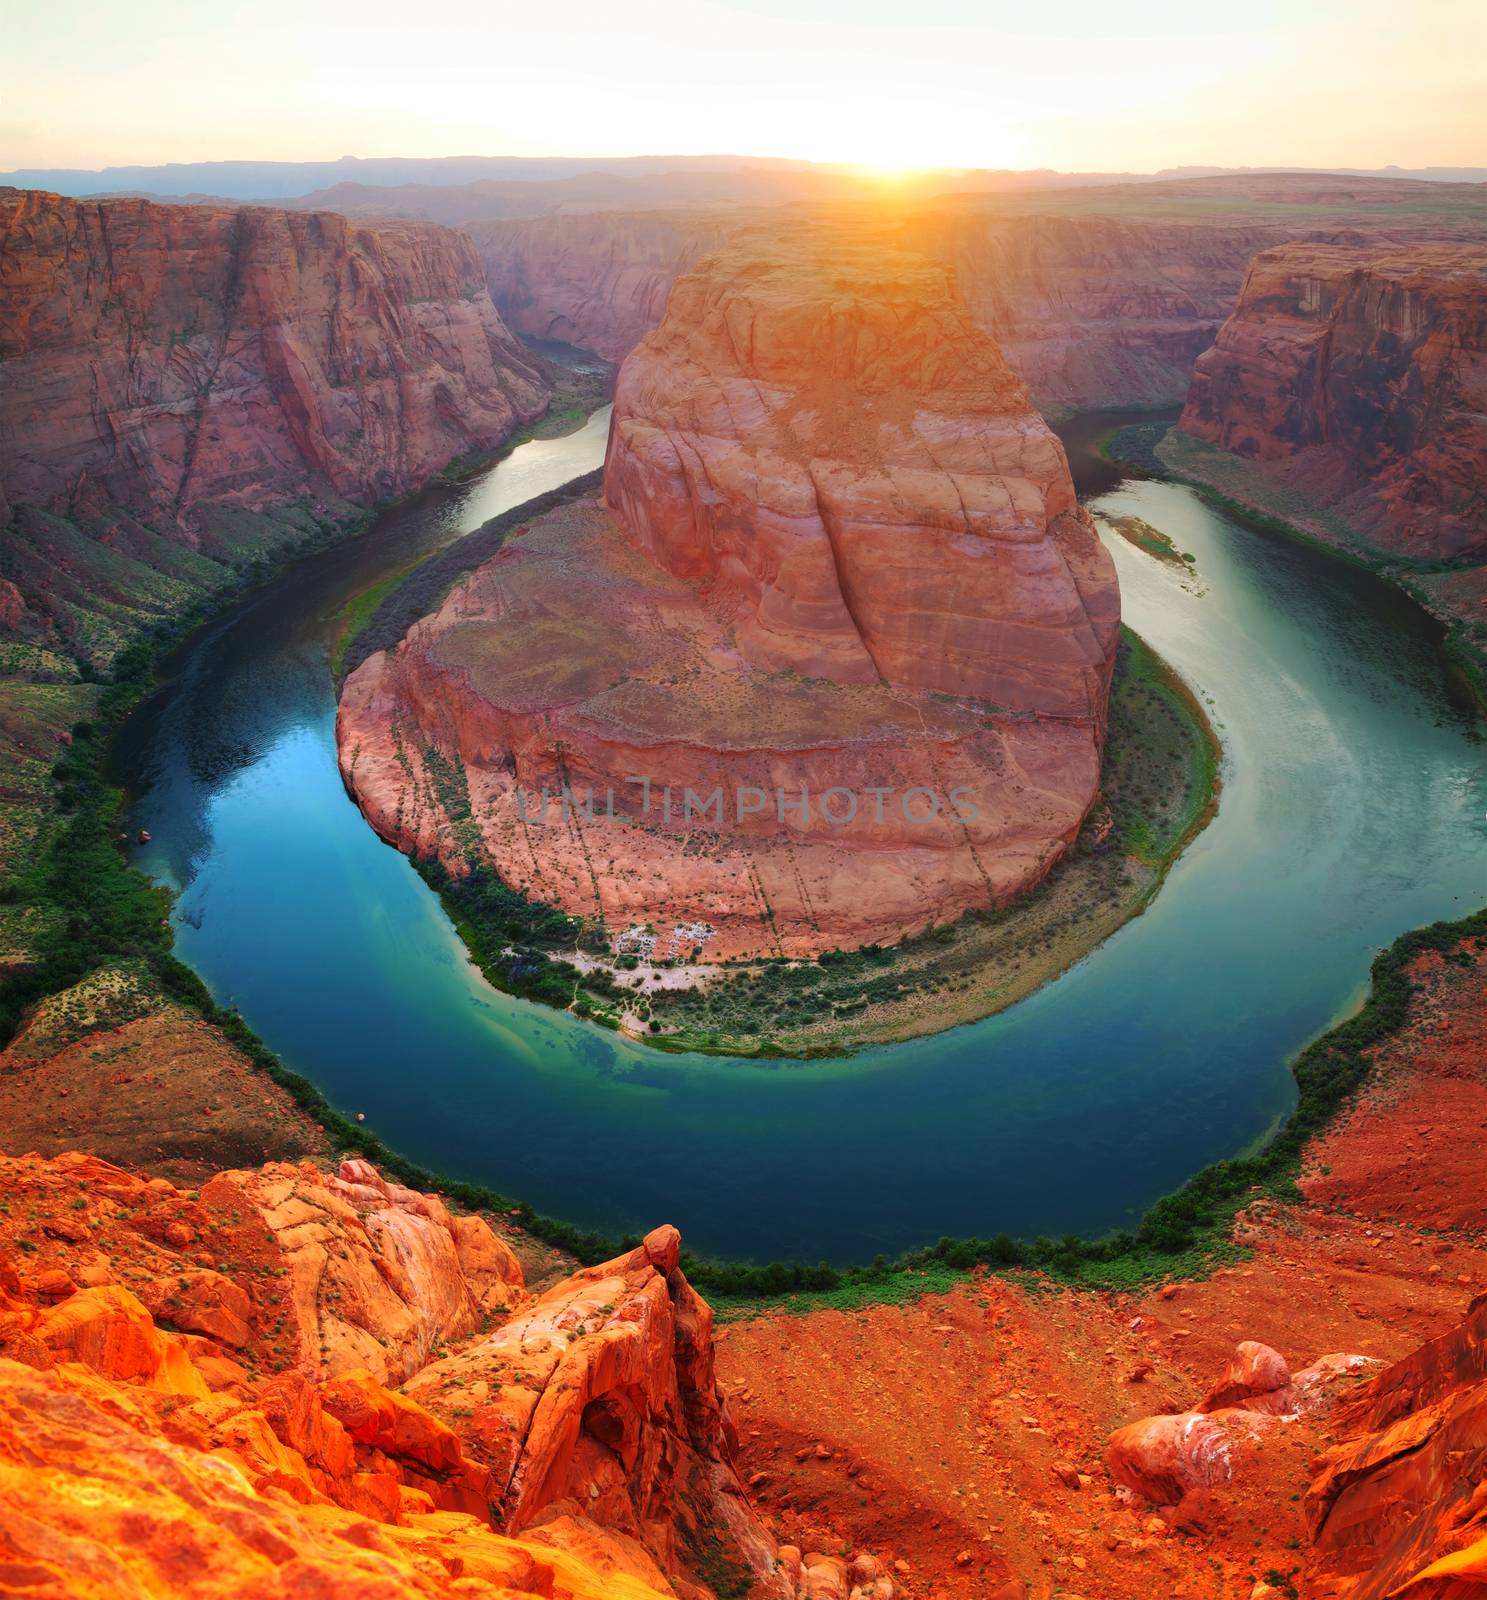 Panoramic overview of Horseshoe Bend near Page, Arizona by AndreyKr